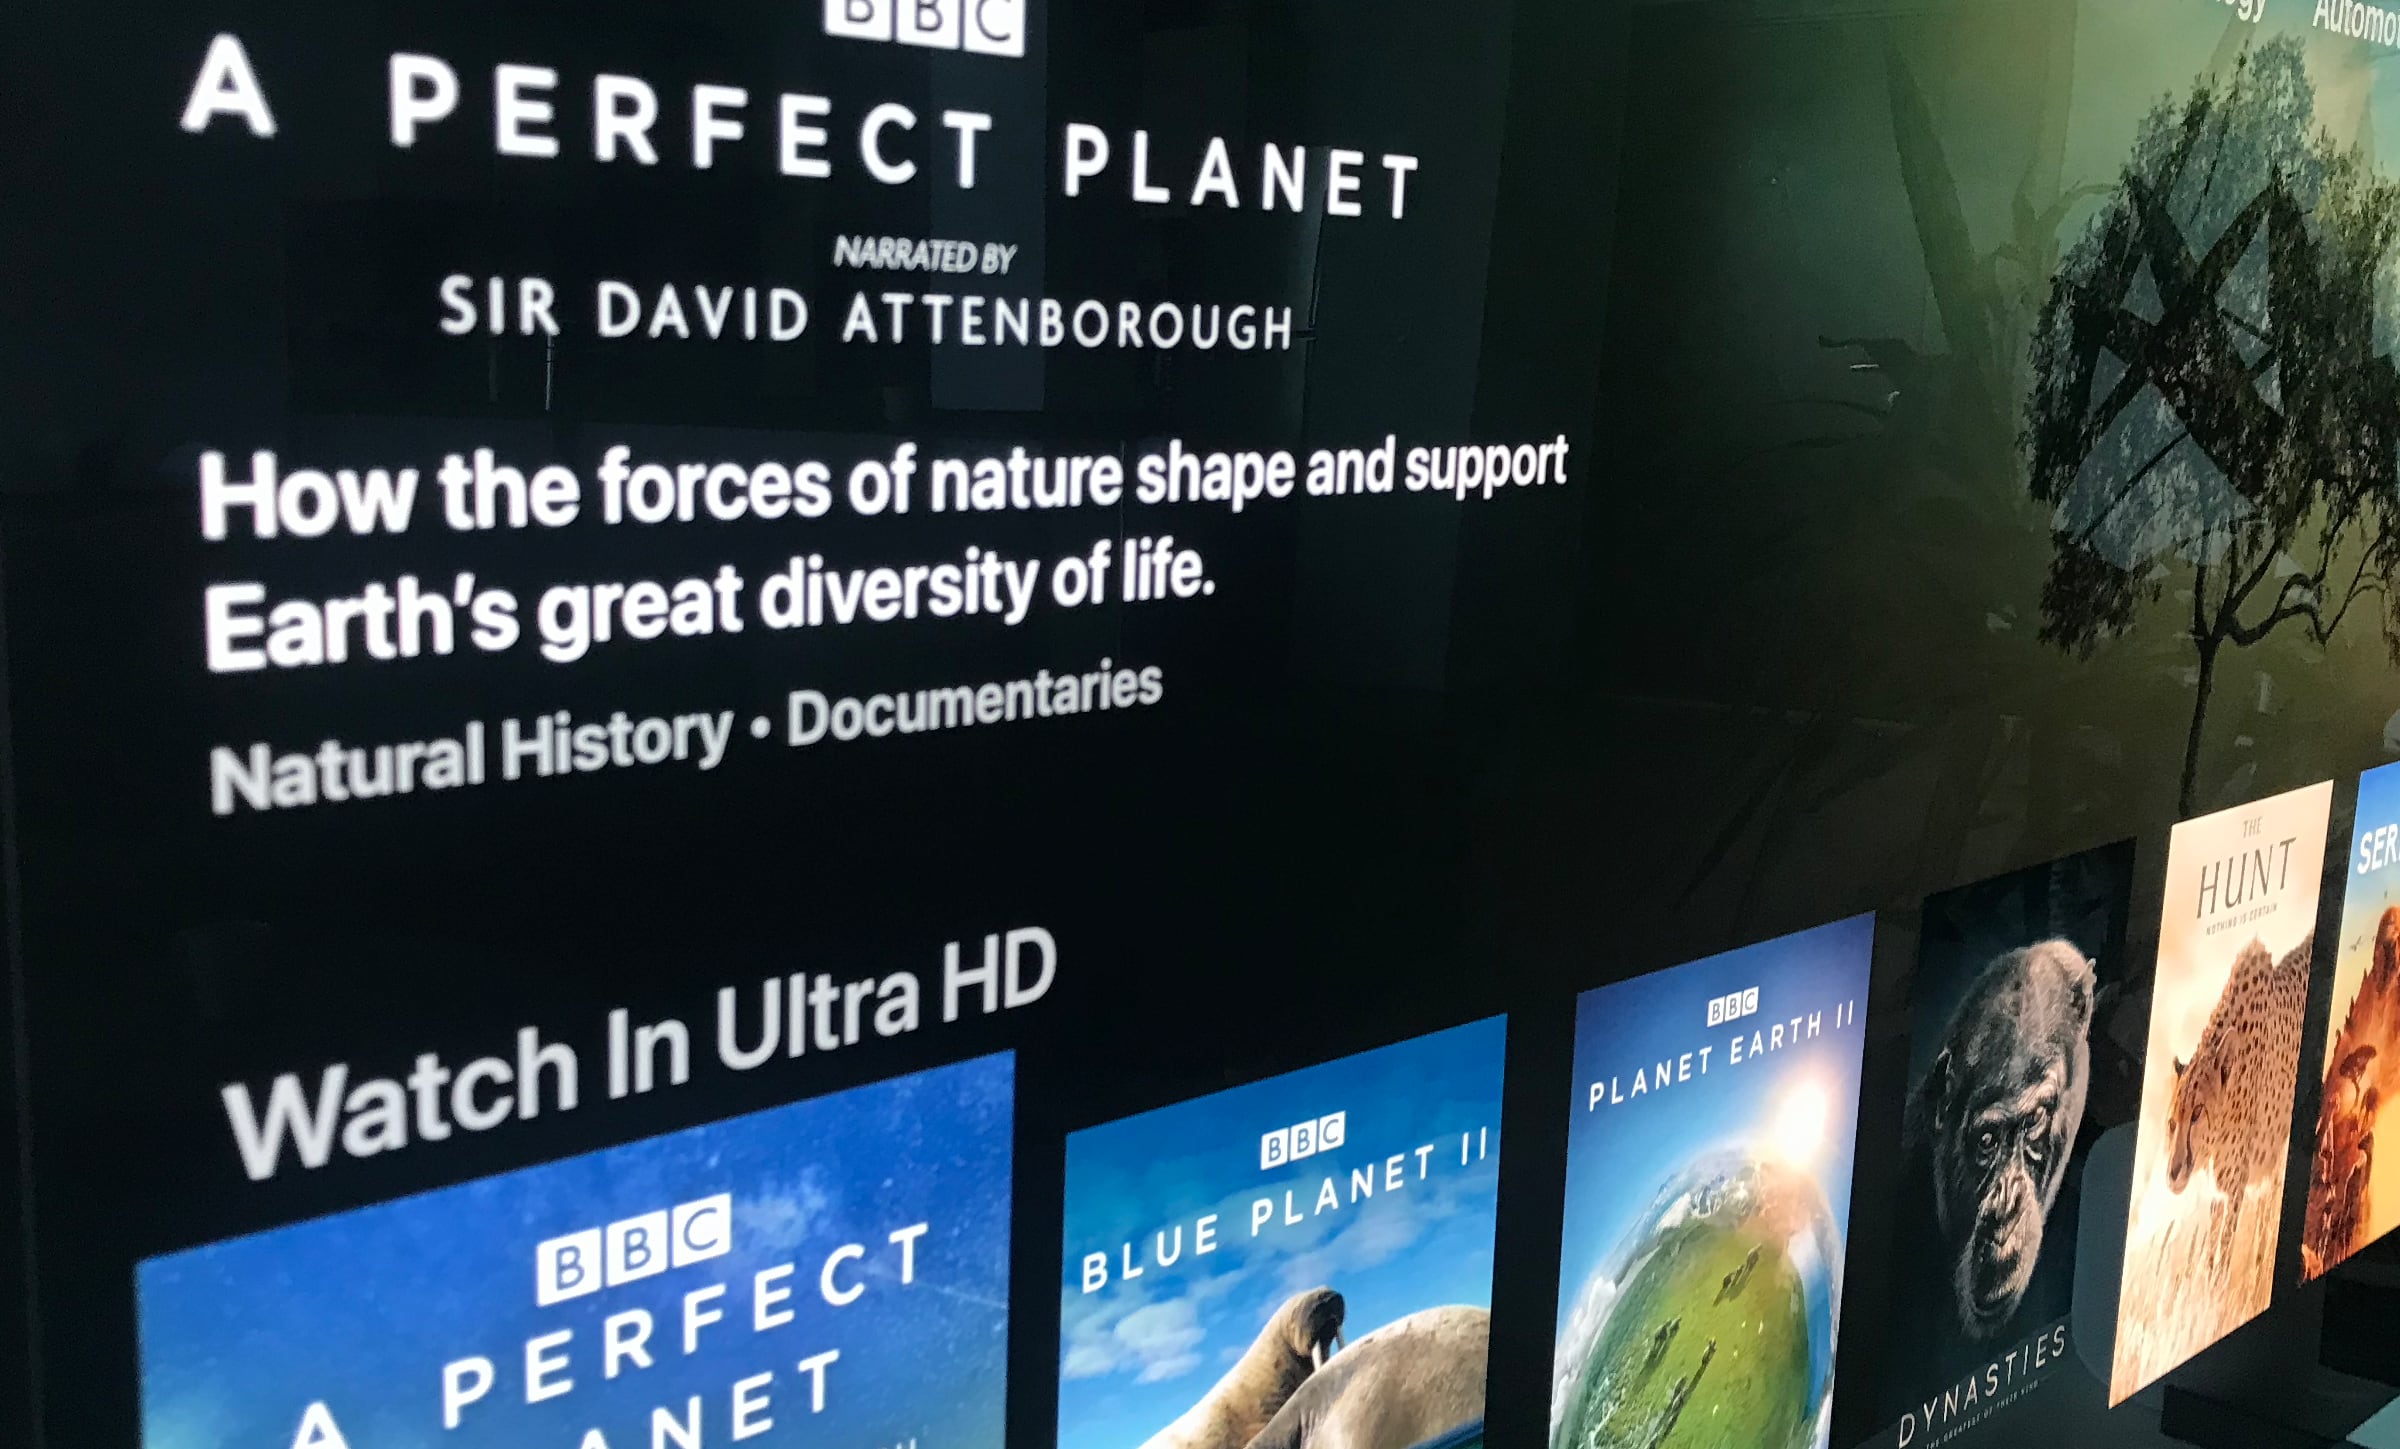 Learner Afdæk Visum Discovery+ launches today with 4K nature documentaries - FlatpanelsHD